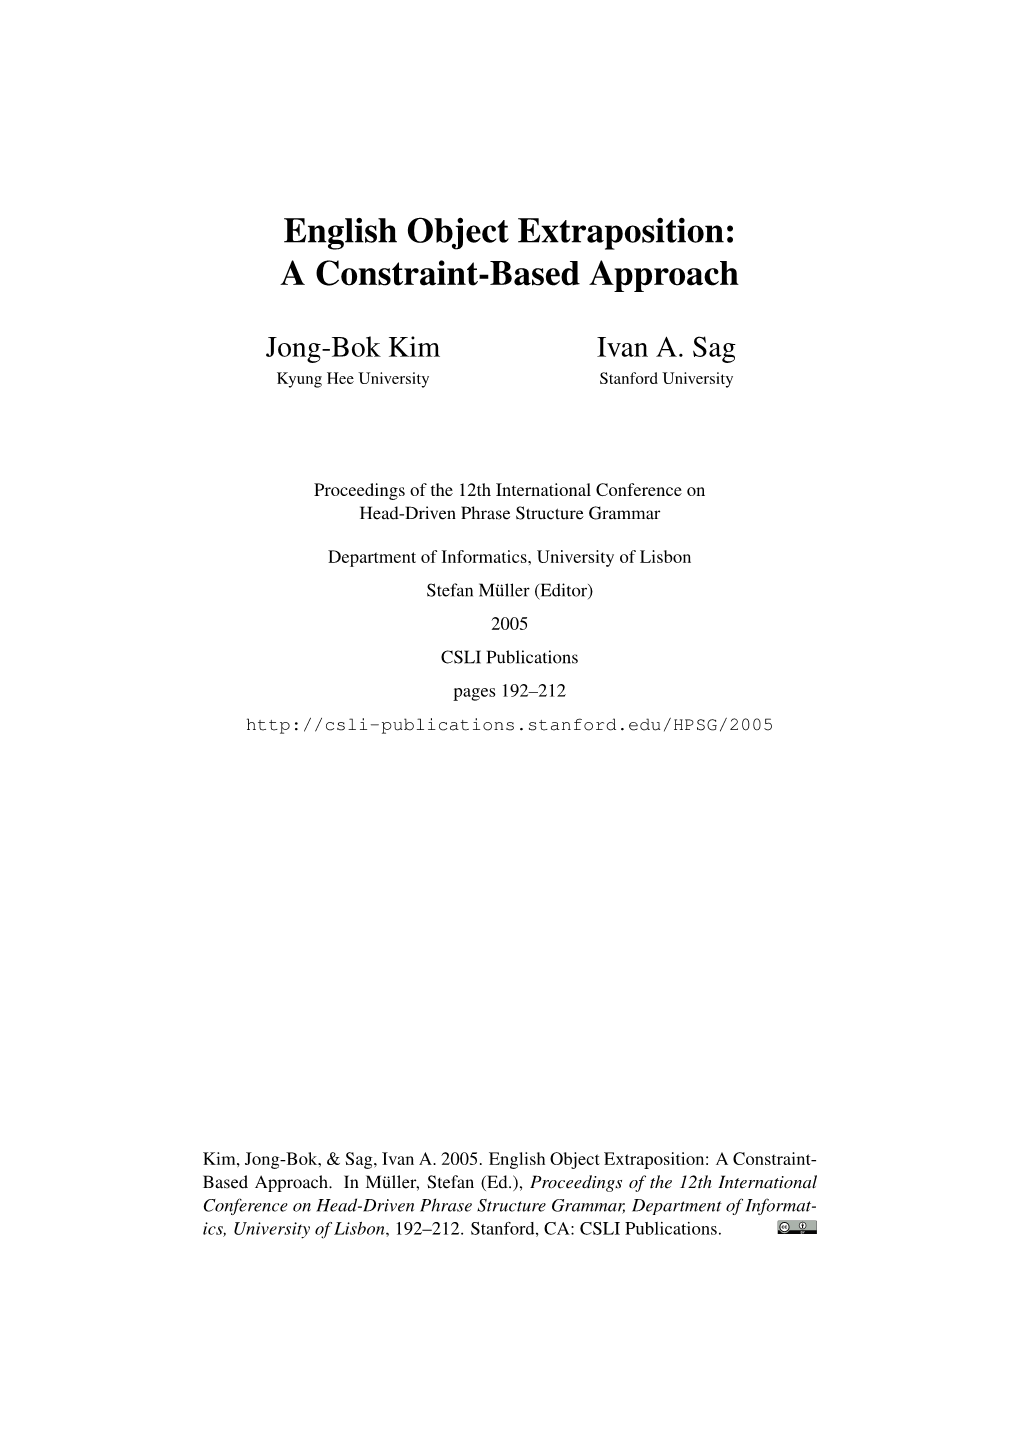 English Object Extraposition: a Constraint-Based Approach